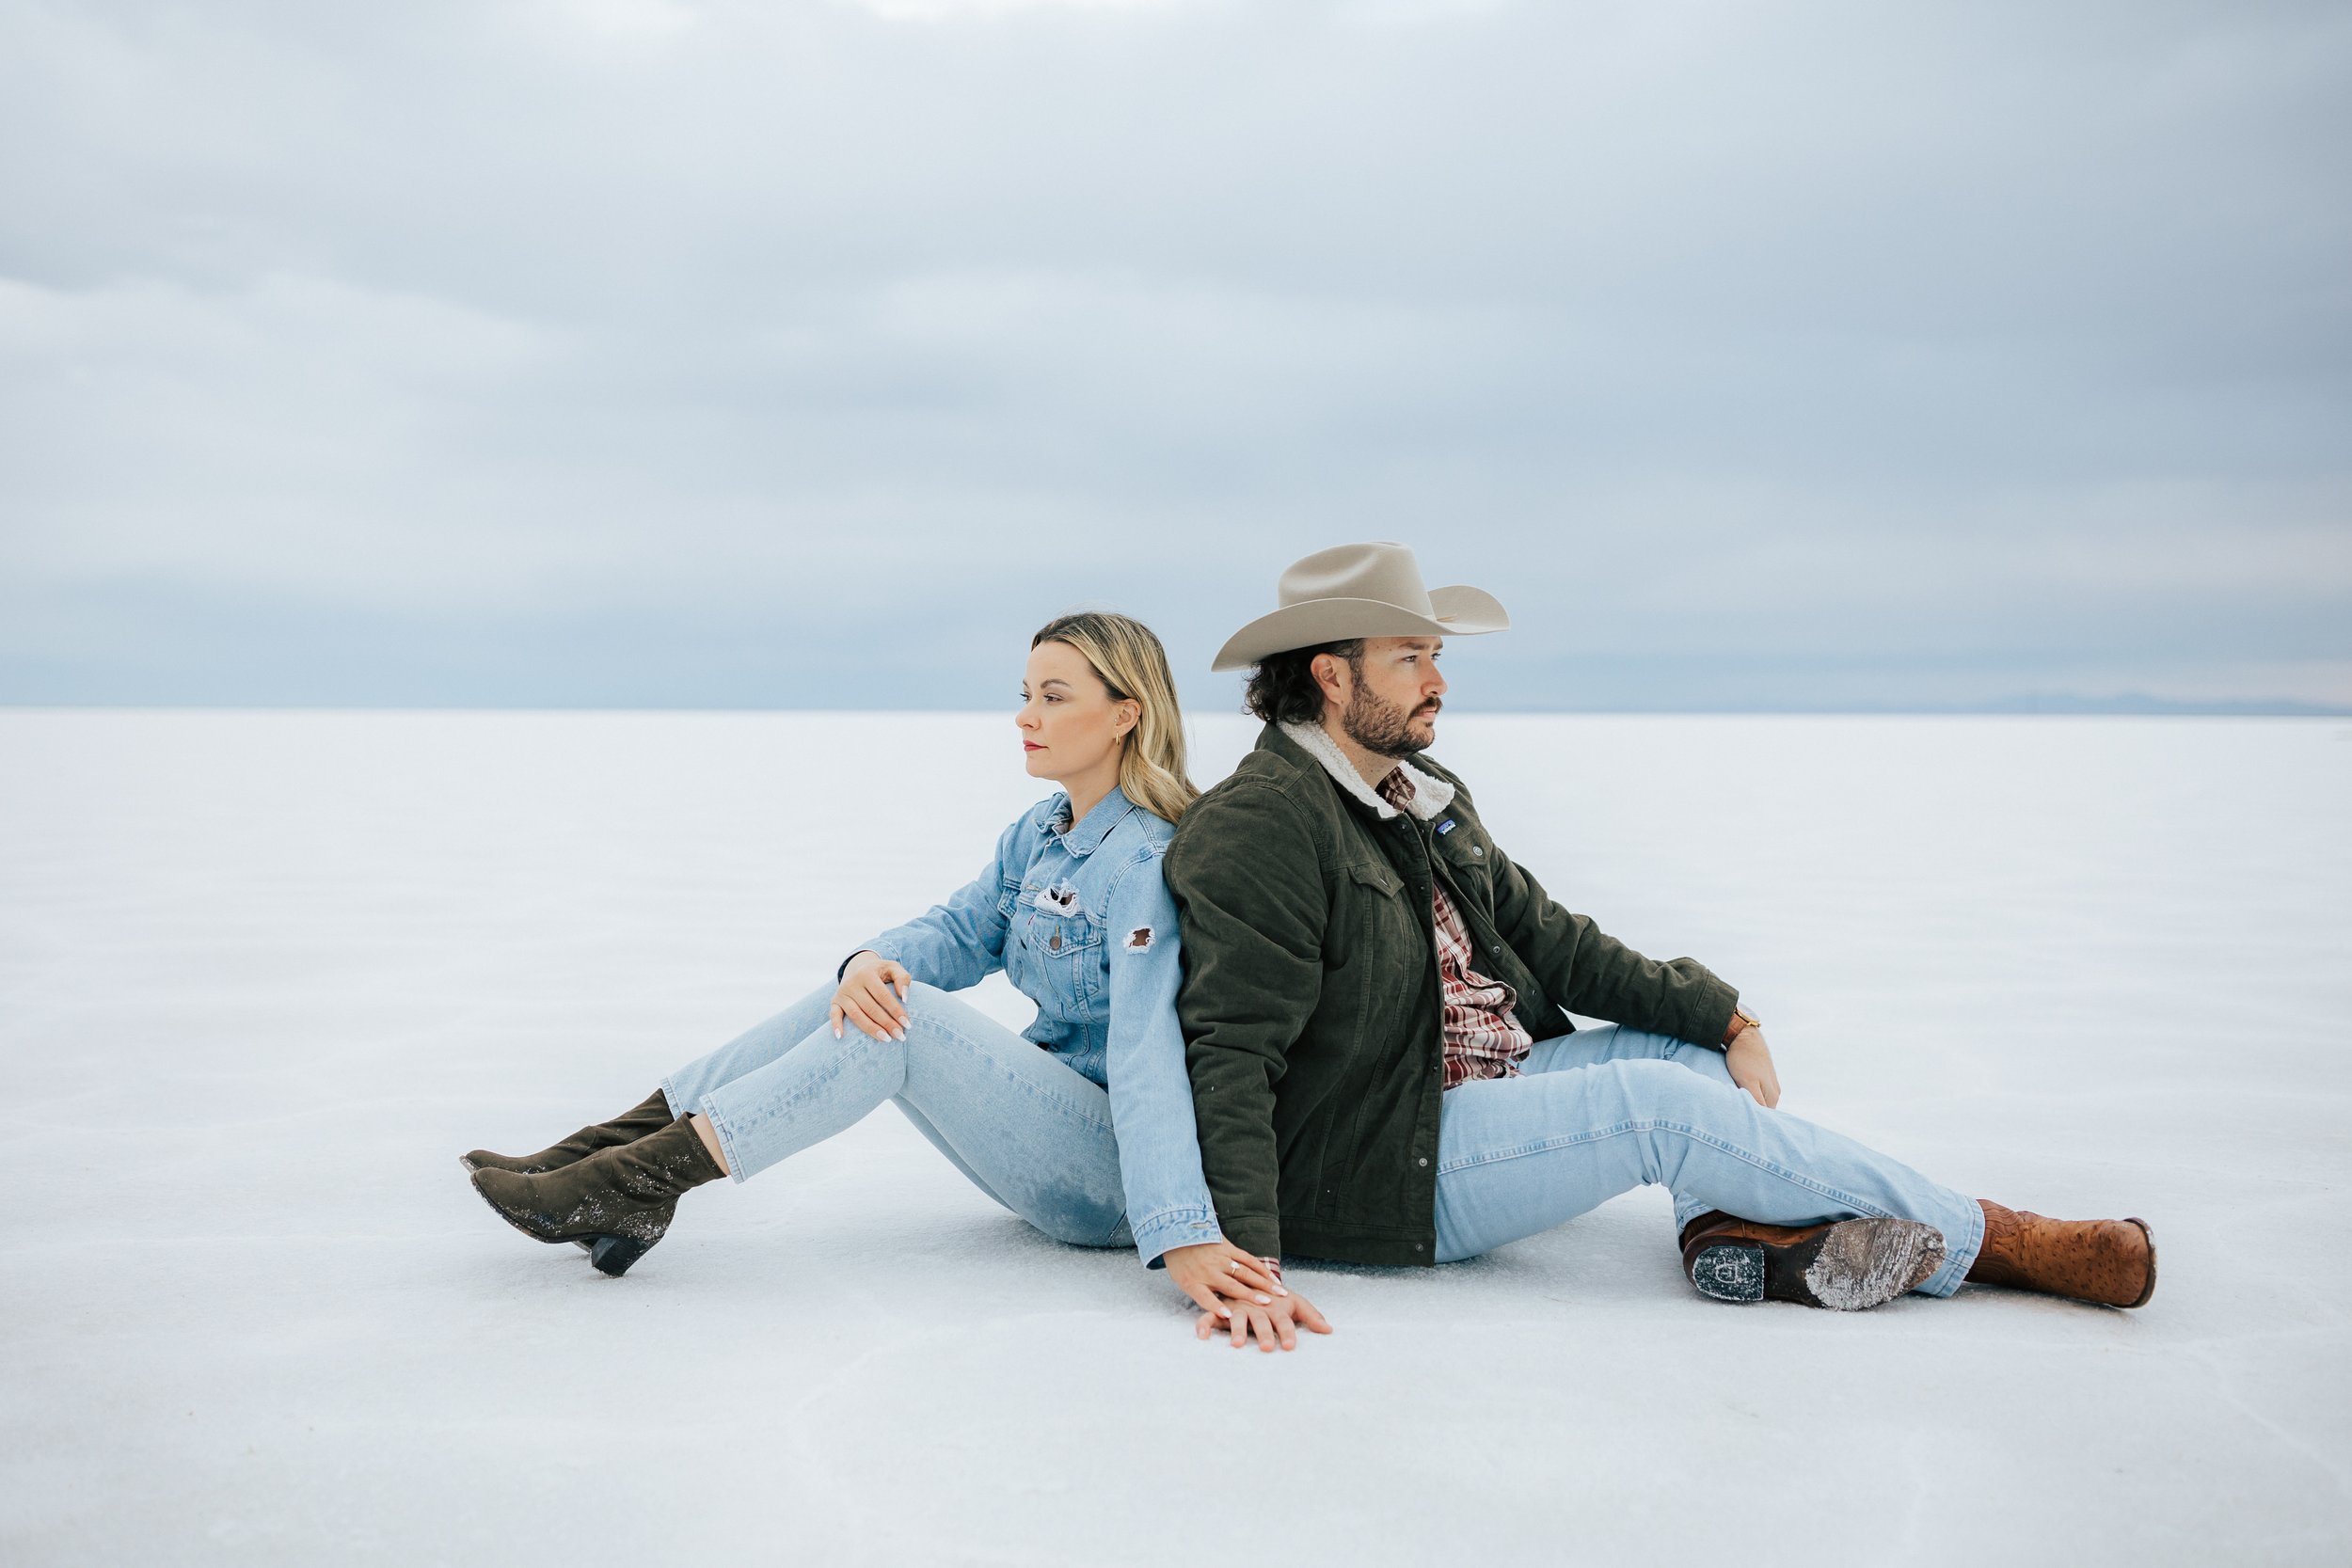  Engaged couple sits back to back on the salt at the Bonneville Salt Flats near Wendover, Nevada and Salt Lake City, Utah. The Salt Flats are white and the sky is overcast. The mountains show behind. Engagement session at the Utah Salt Flats. Salt Fl